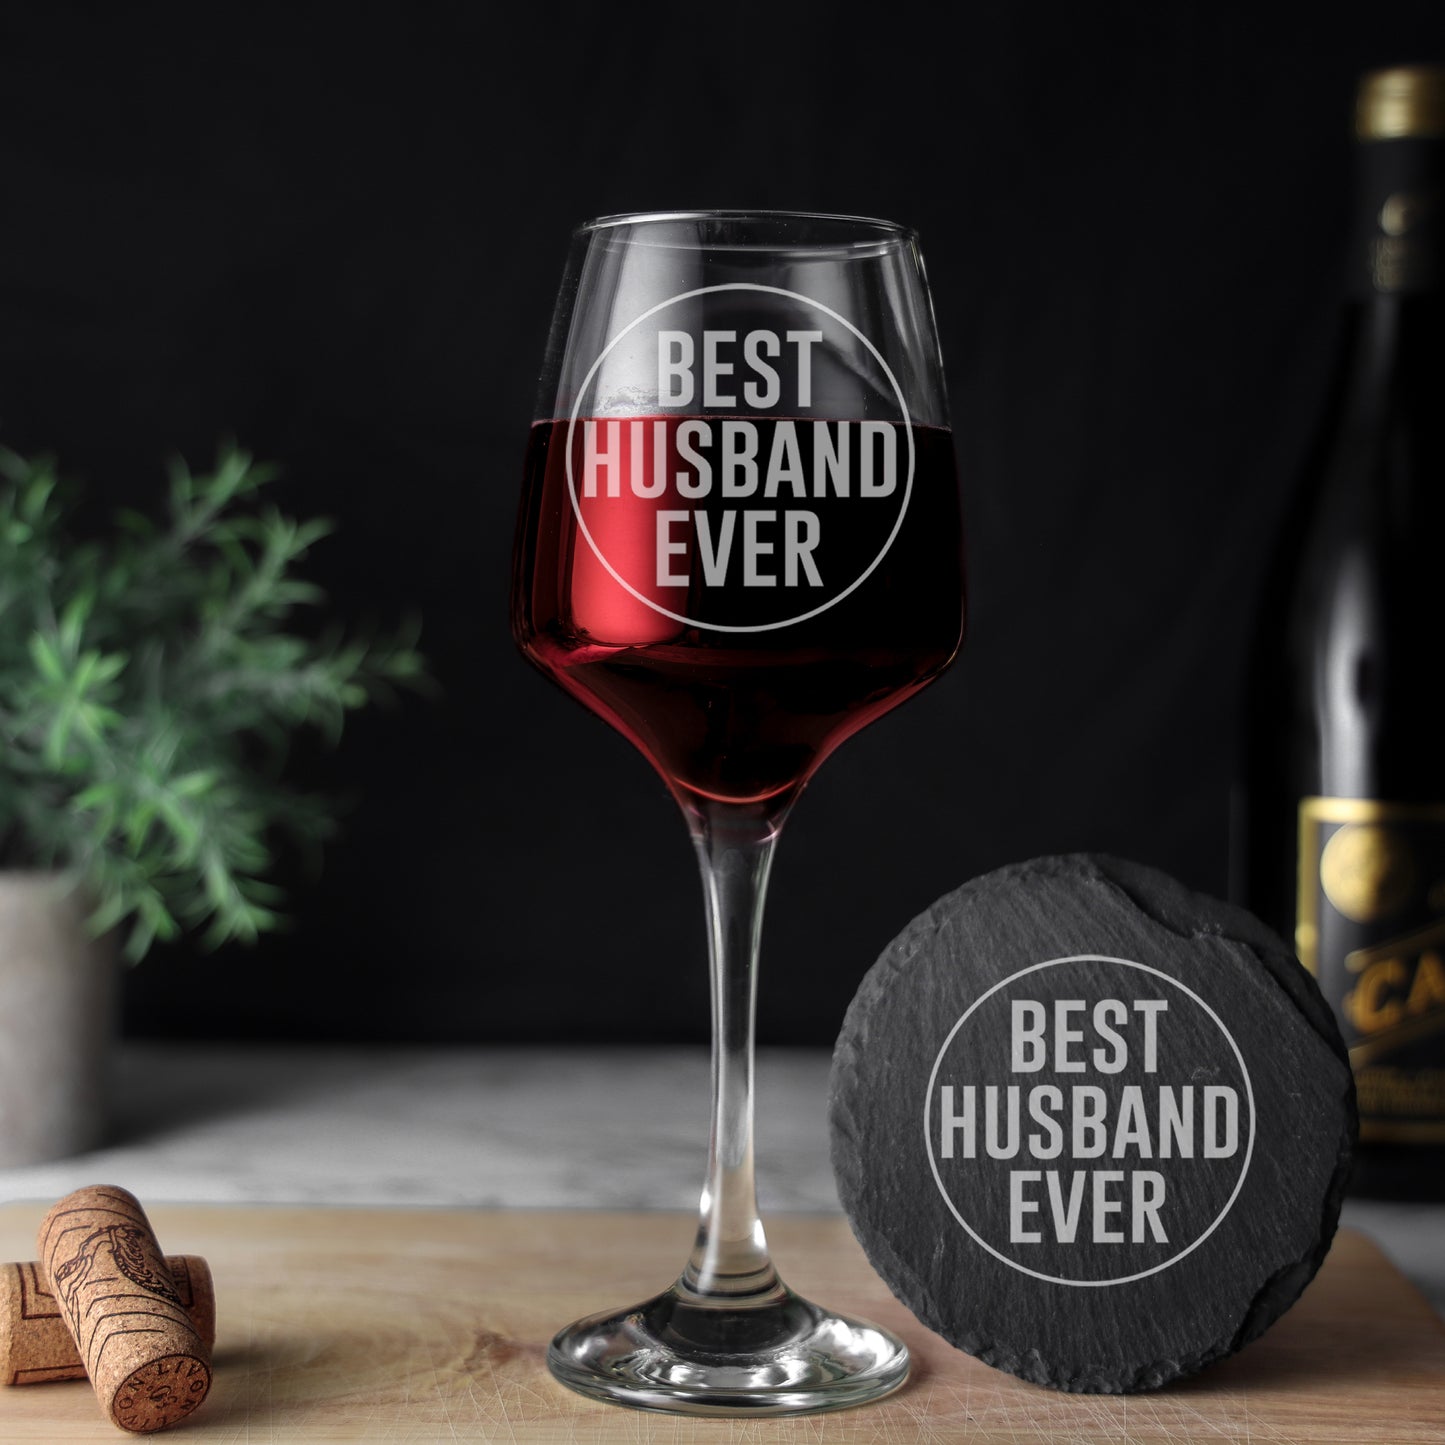 Best Husband Ever Engraved Wine Glass and/or Coaster Gift  - Always Looking Good - Glass & Round Coaster  